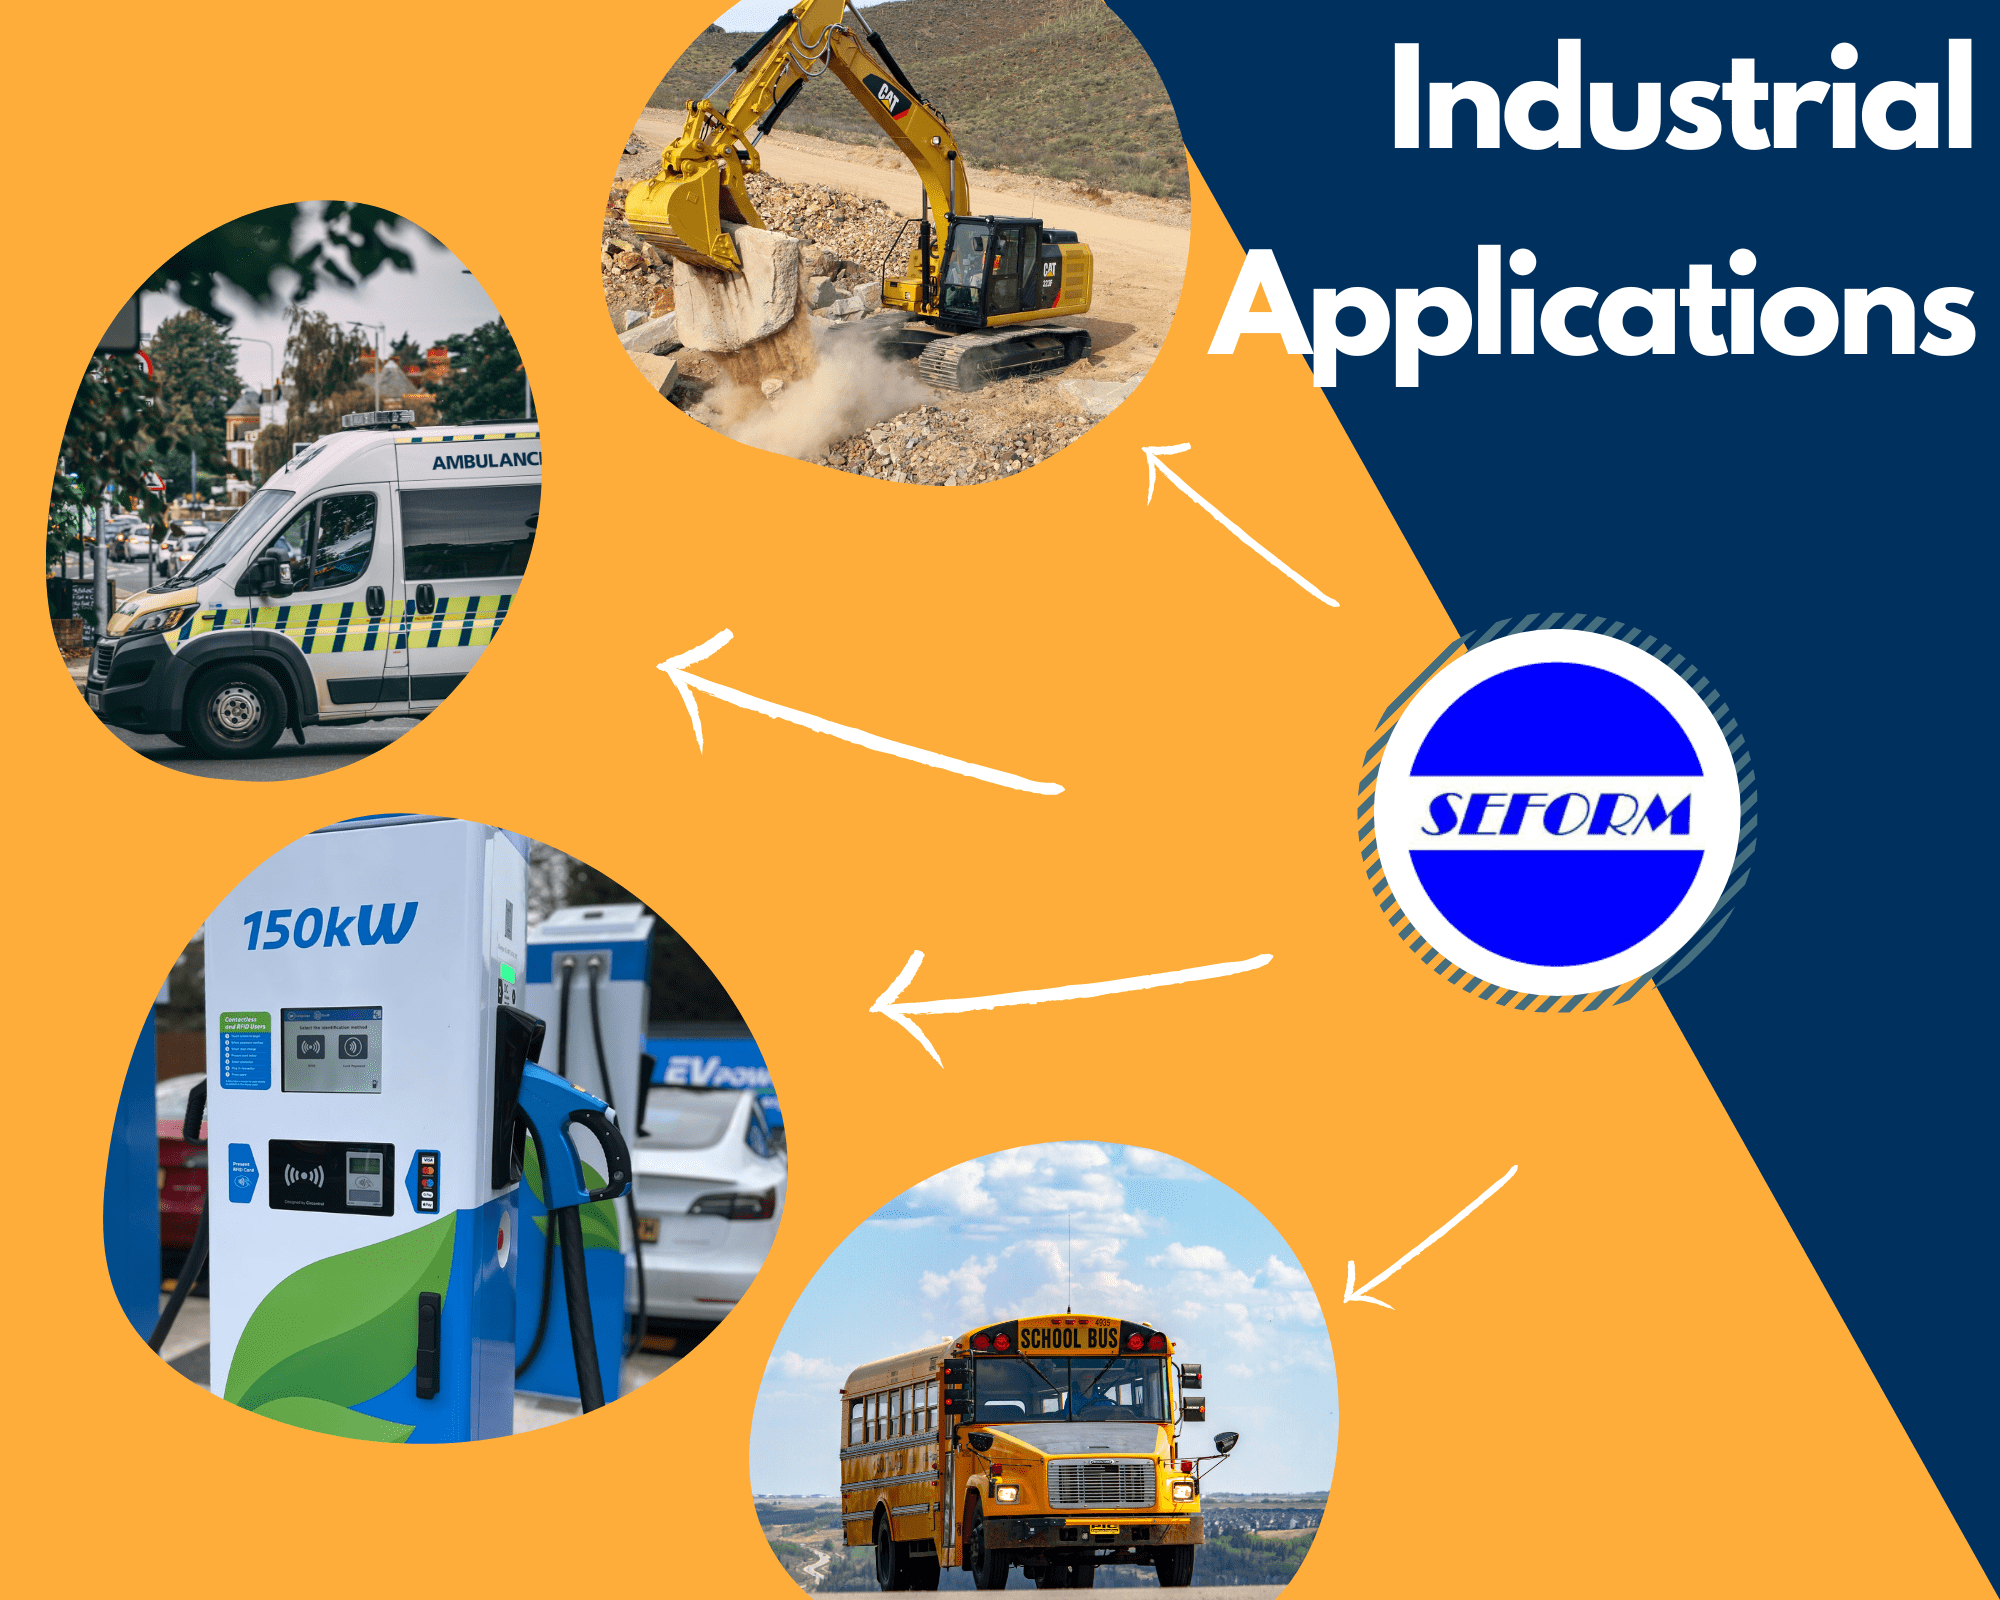 industrial-applications-excavator-ambulance-ev-charger-station-school-bus